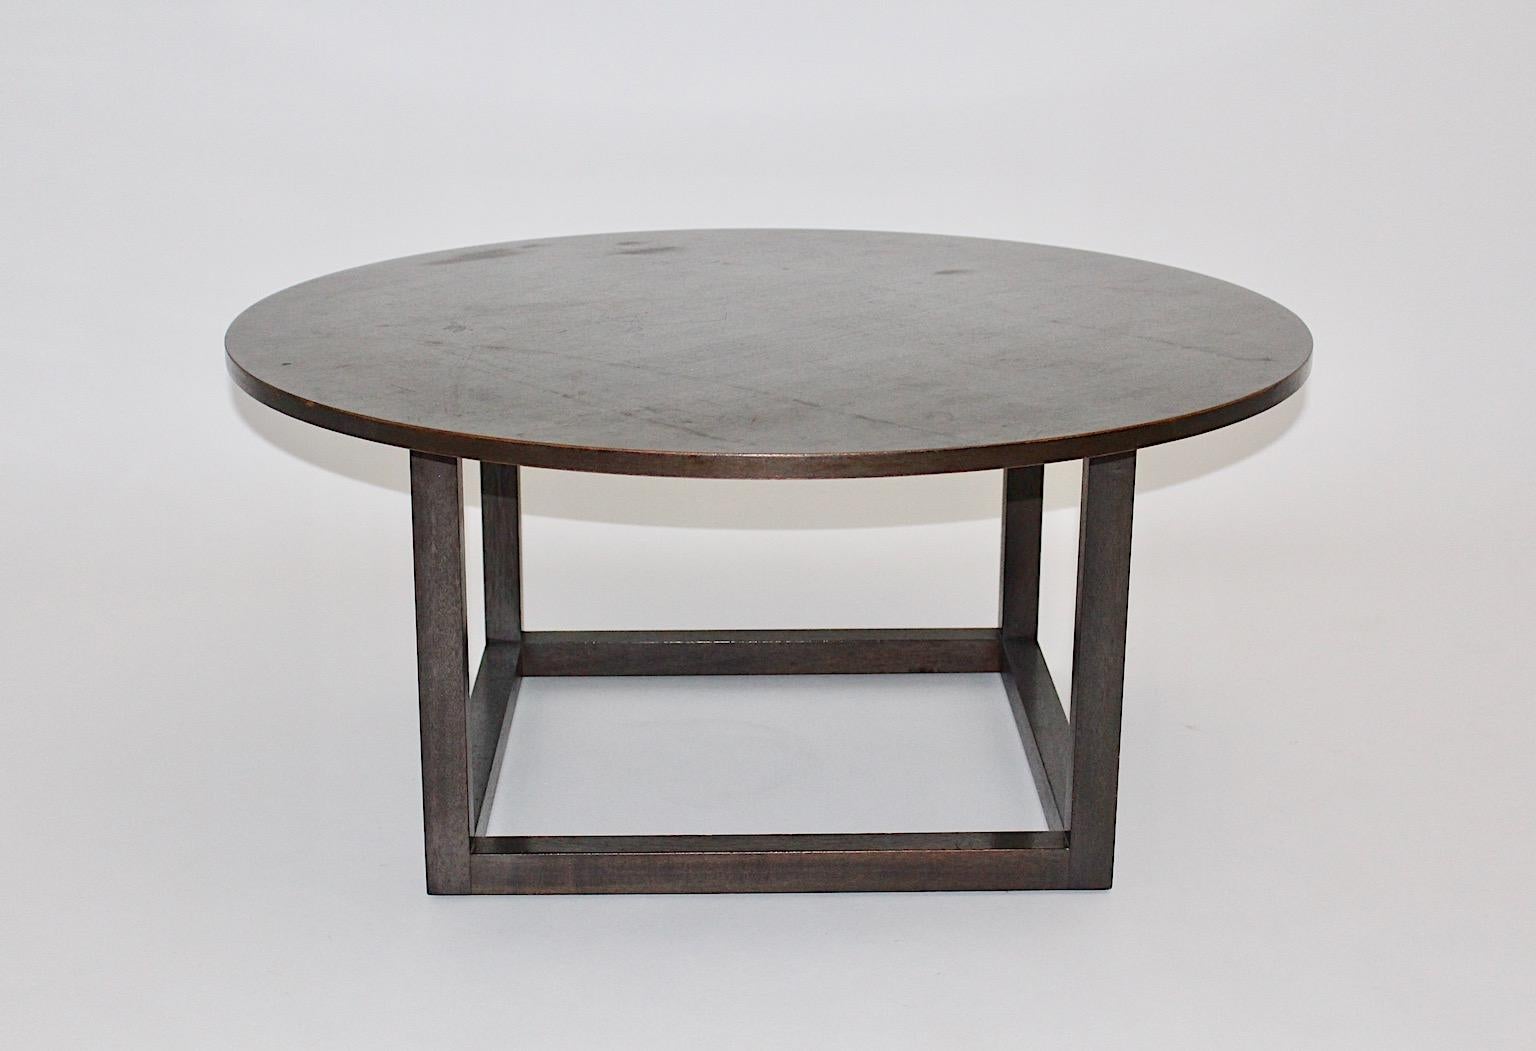 Modernist vintage sofa table or coffee table from solid oakwood coffee table in the style of Josef Hoffmann, Vienna , 20th century.
This gorgeous sofa table from stained solid oakwood topped with a circular plate , while the base shows rectangular